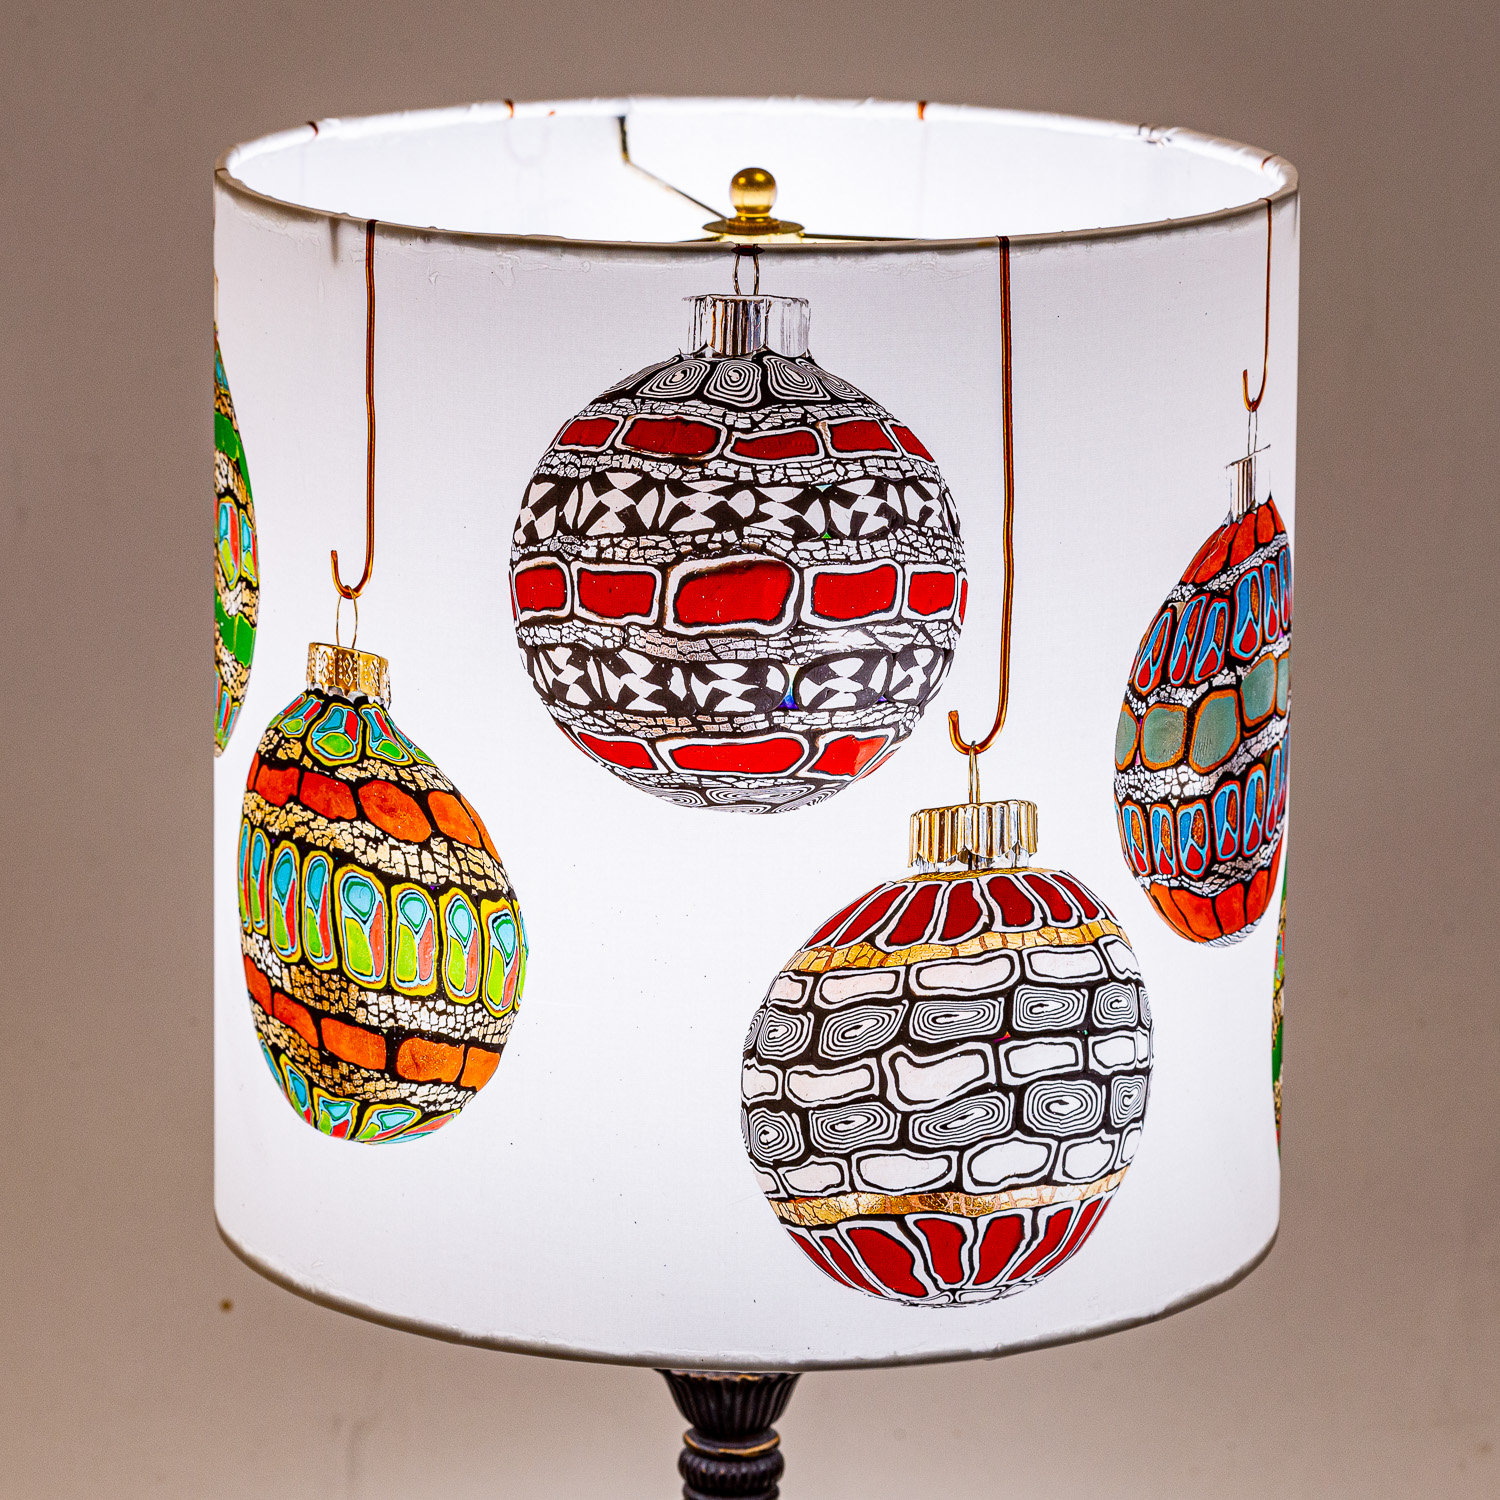 148: Pollymer clay Christmas balls by Janet Elmore -- Photo on Lamp shade by David Elmore